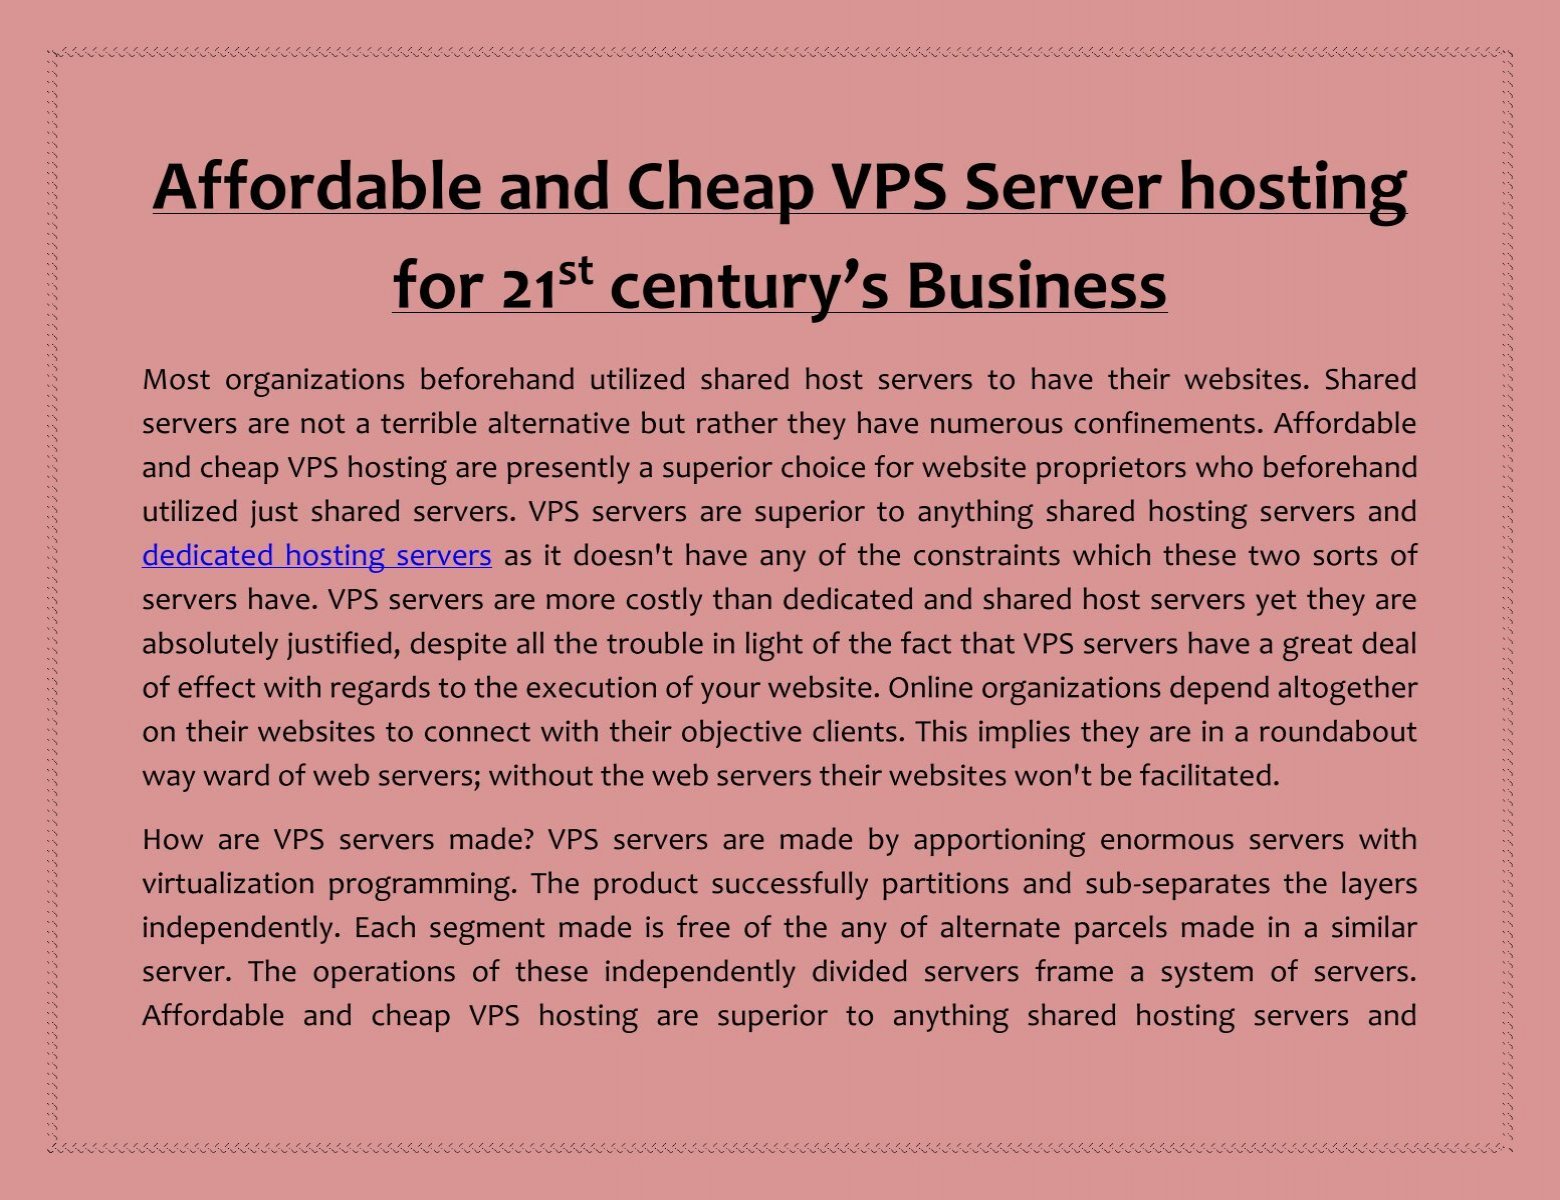 Affordable and Cheap VPS Server hosting for 21st century's Business